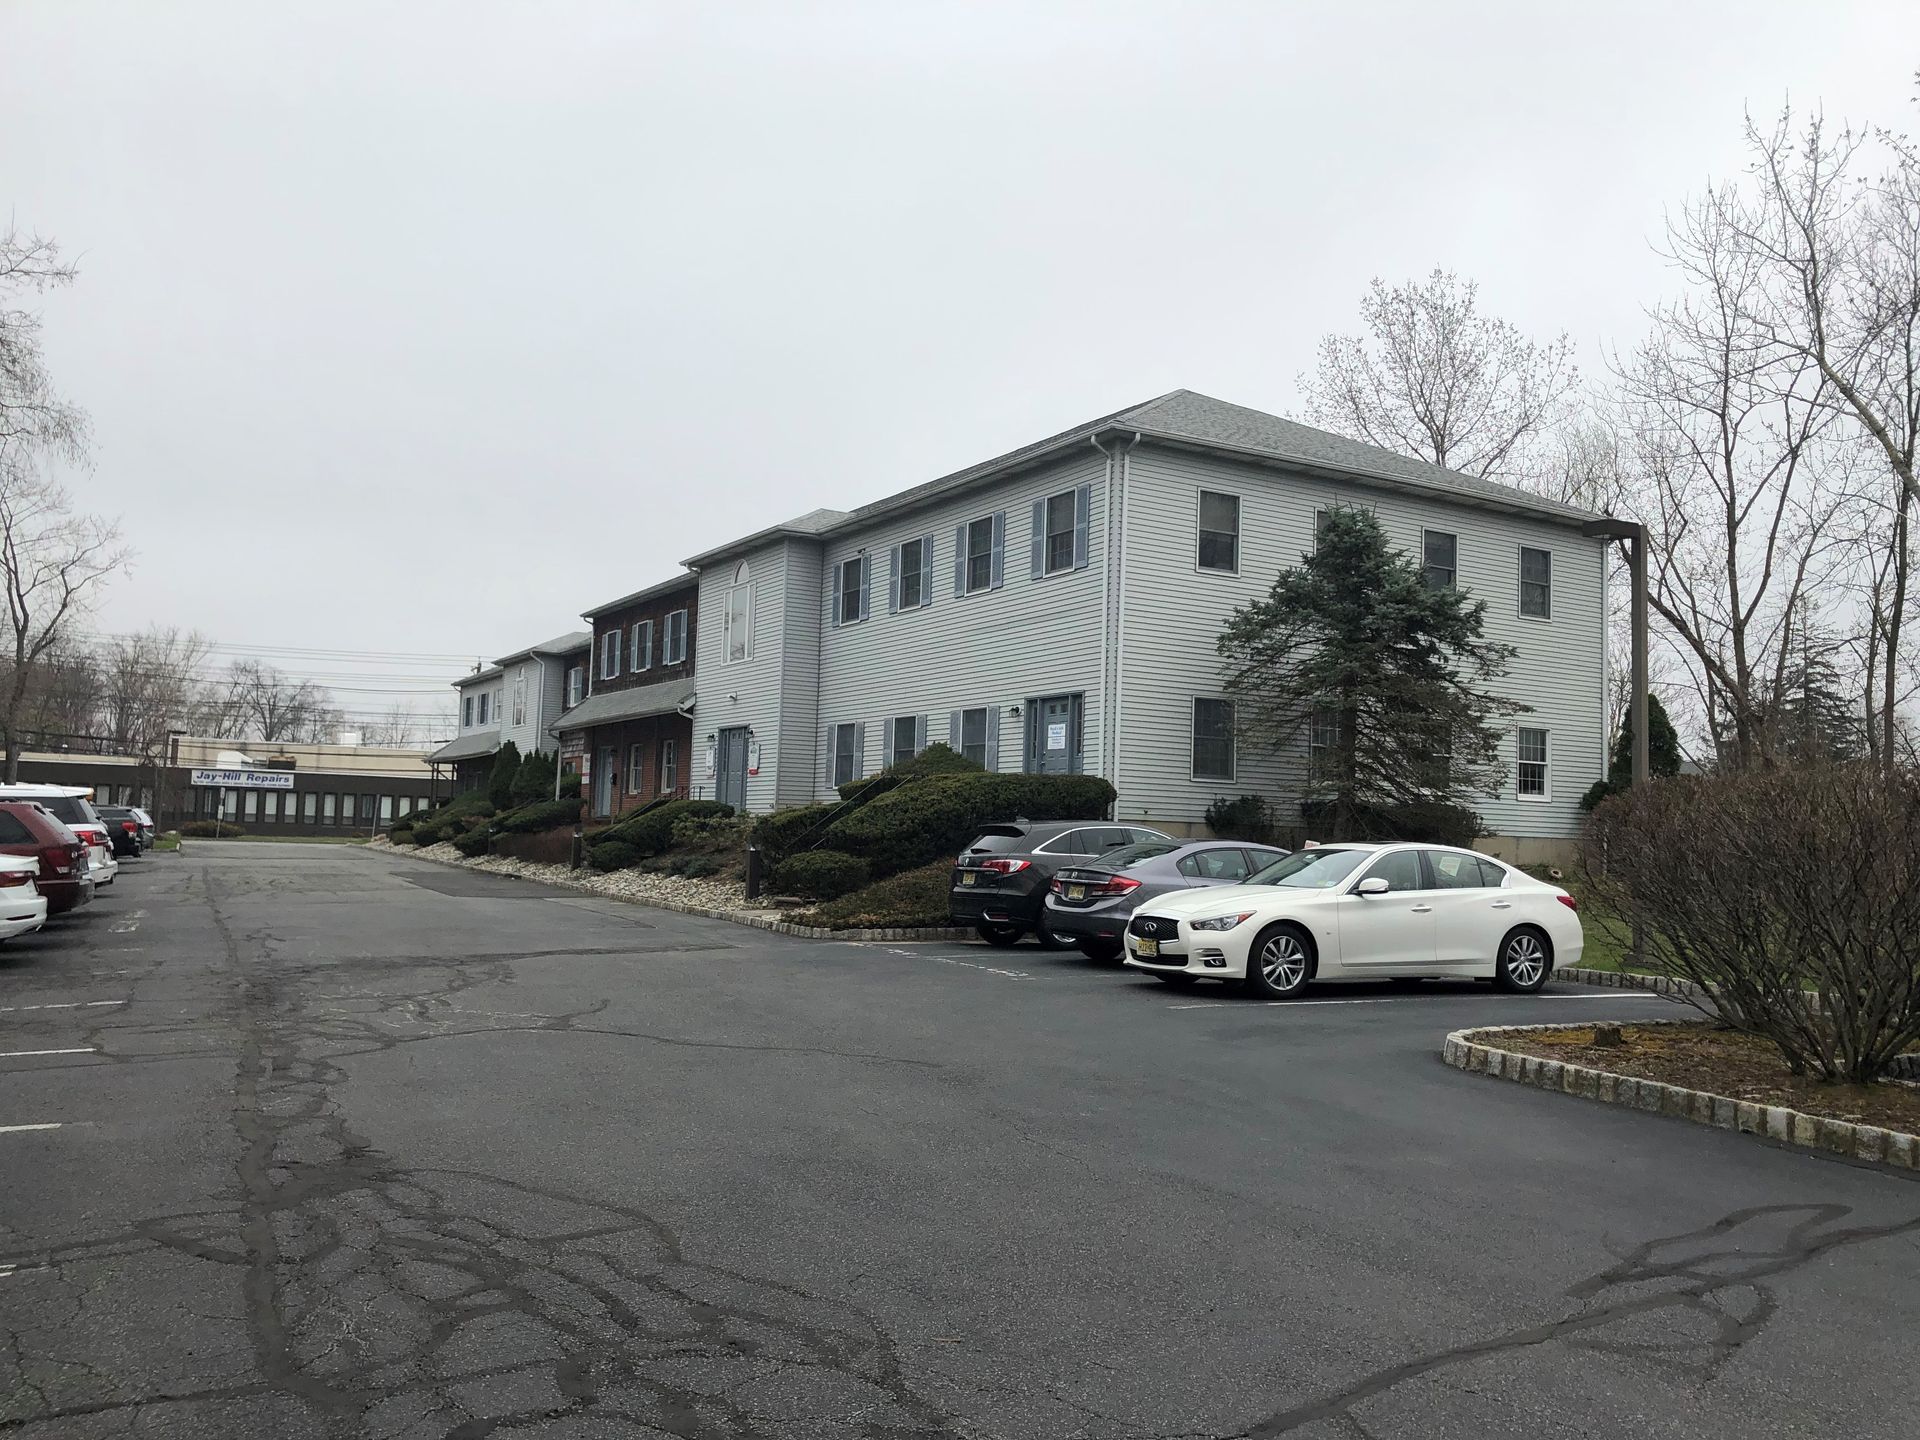 White House in Clinton Rd - Clifton, NJ - Evergreen Commercial Real Estate Brokers Inc